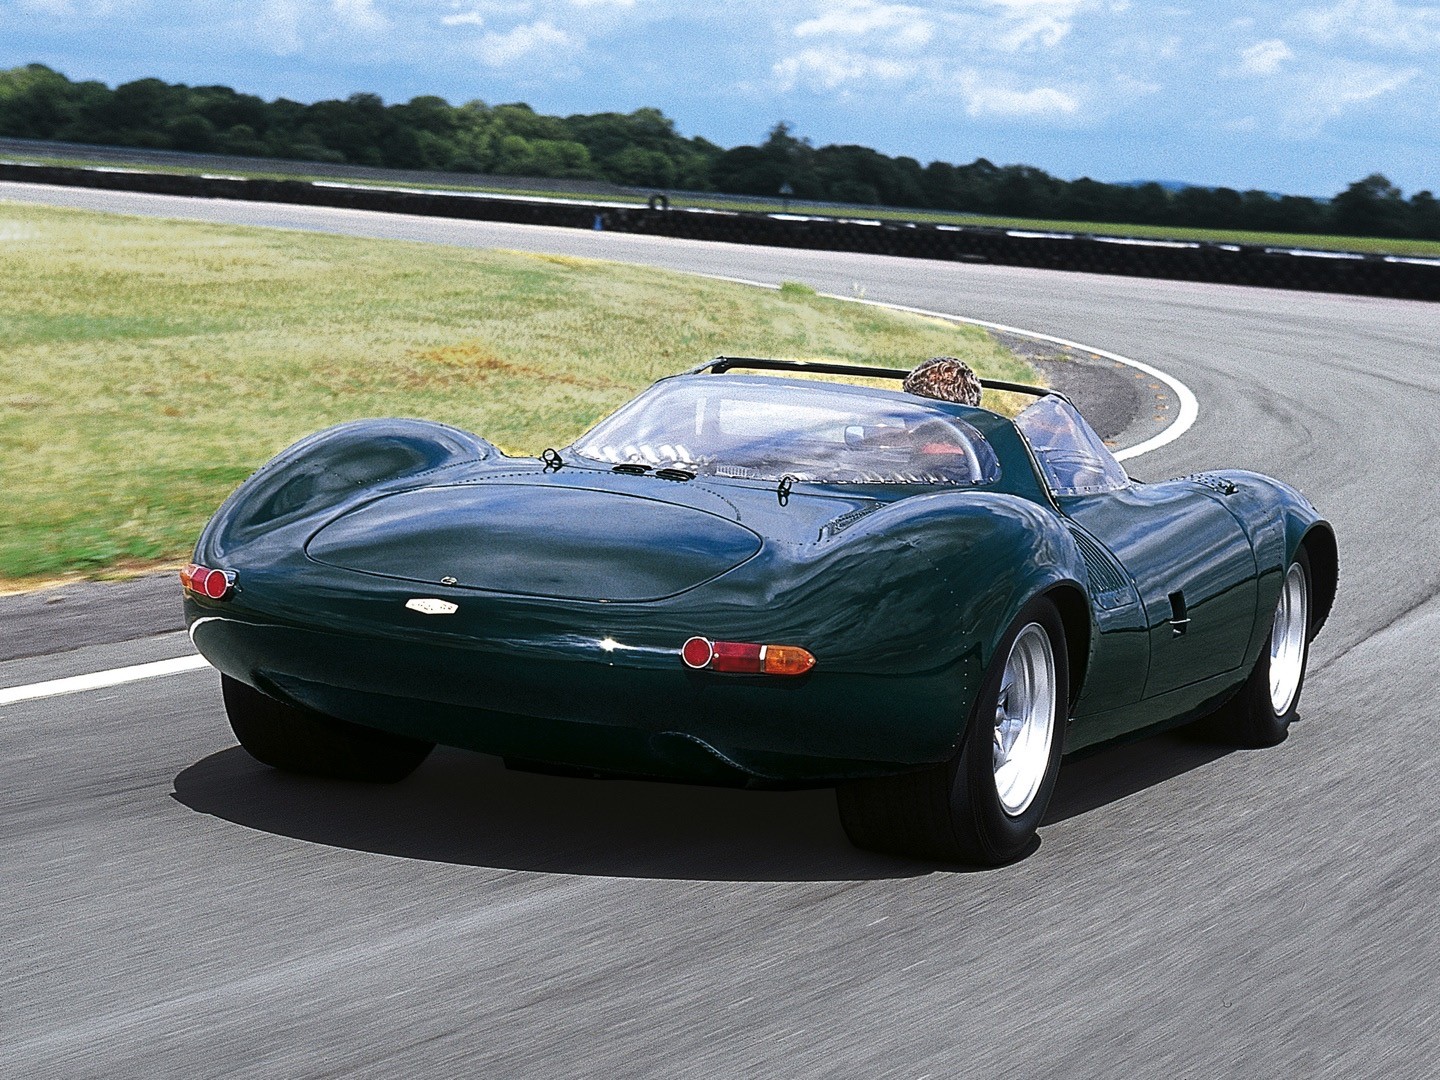 Jaguar Xj13 Prototype To Make Le Mans Debut 50 Years After It Was